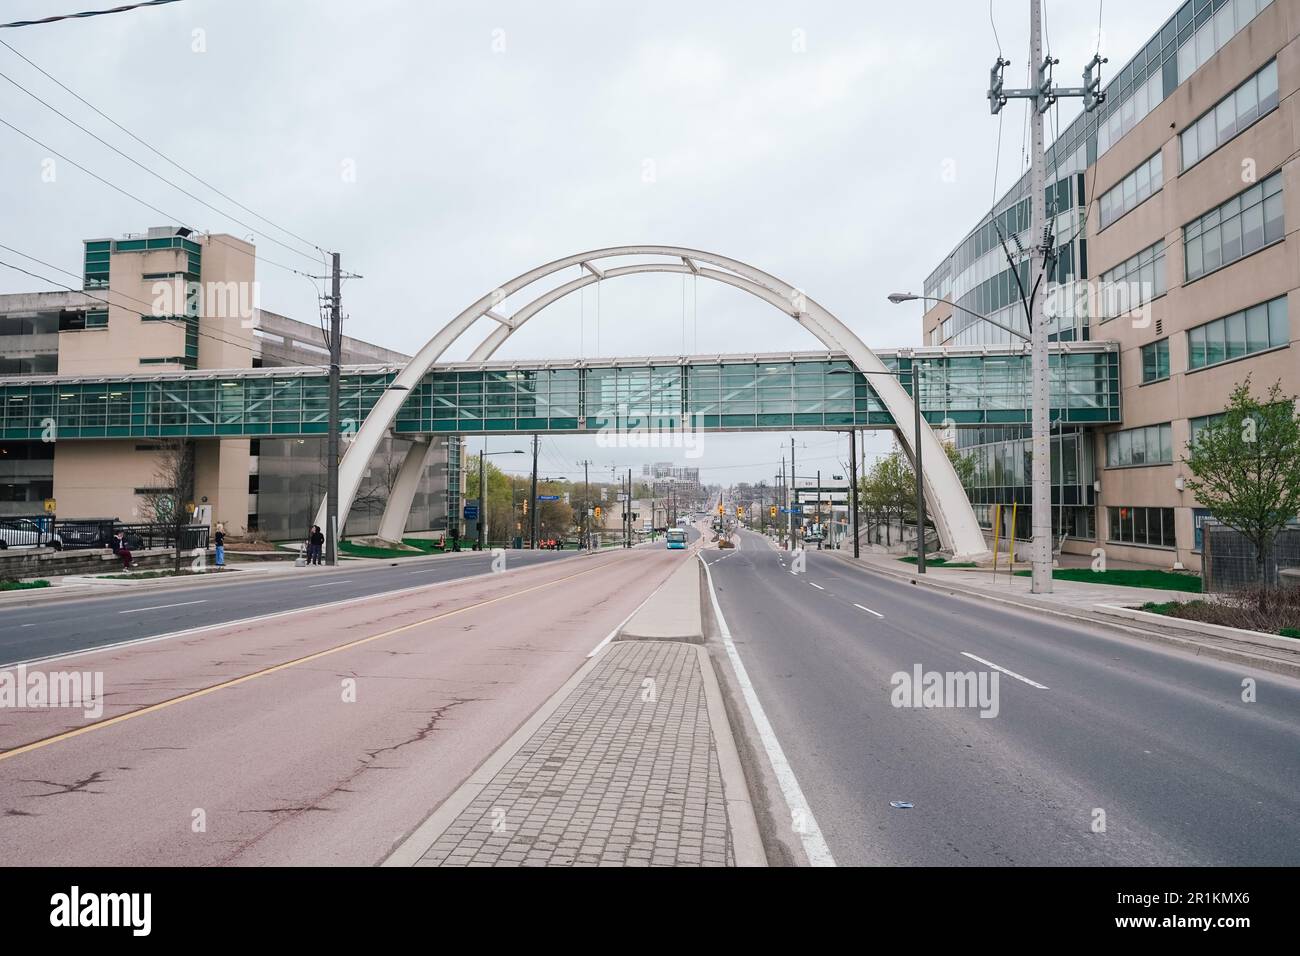 An arch and bridge connecting two buildings for Southlake hosptial in Newmarket, Ontario, Canada Stock Photo